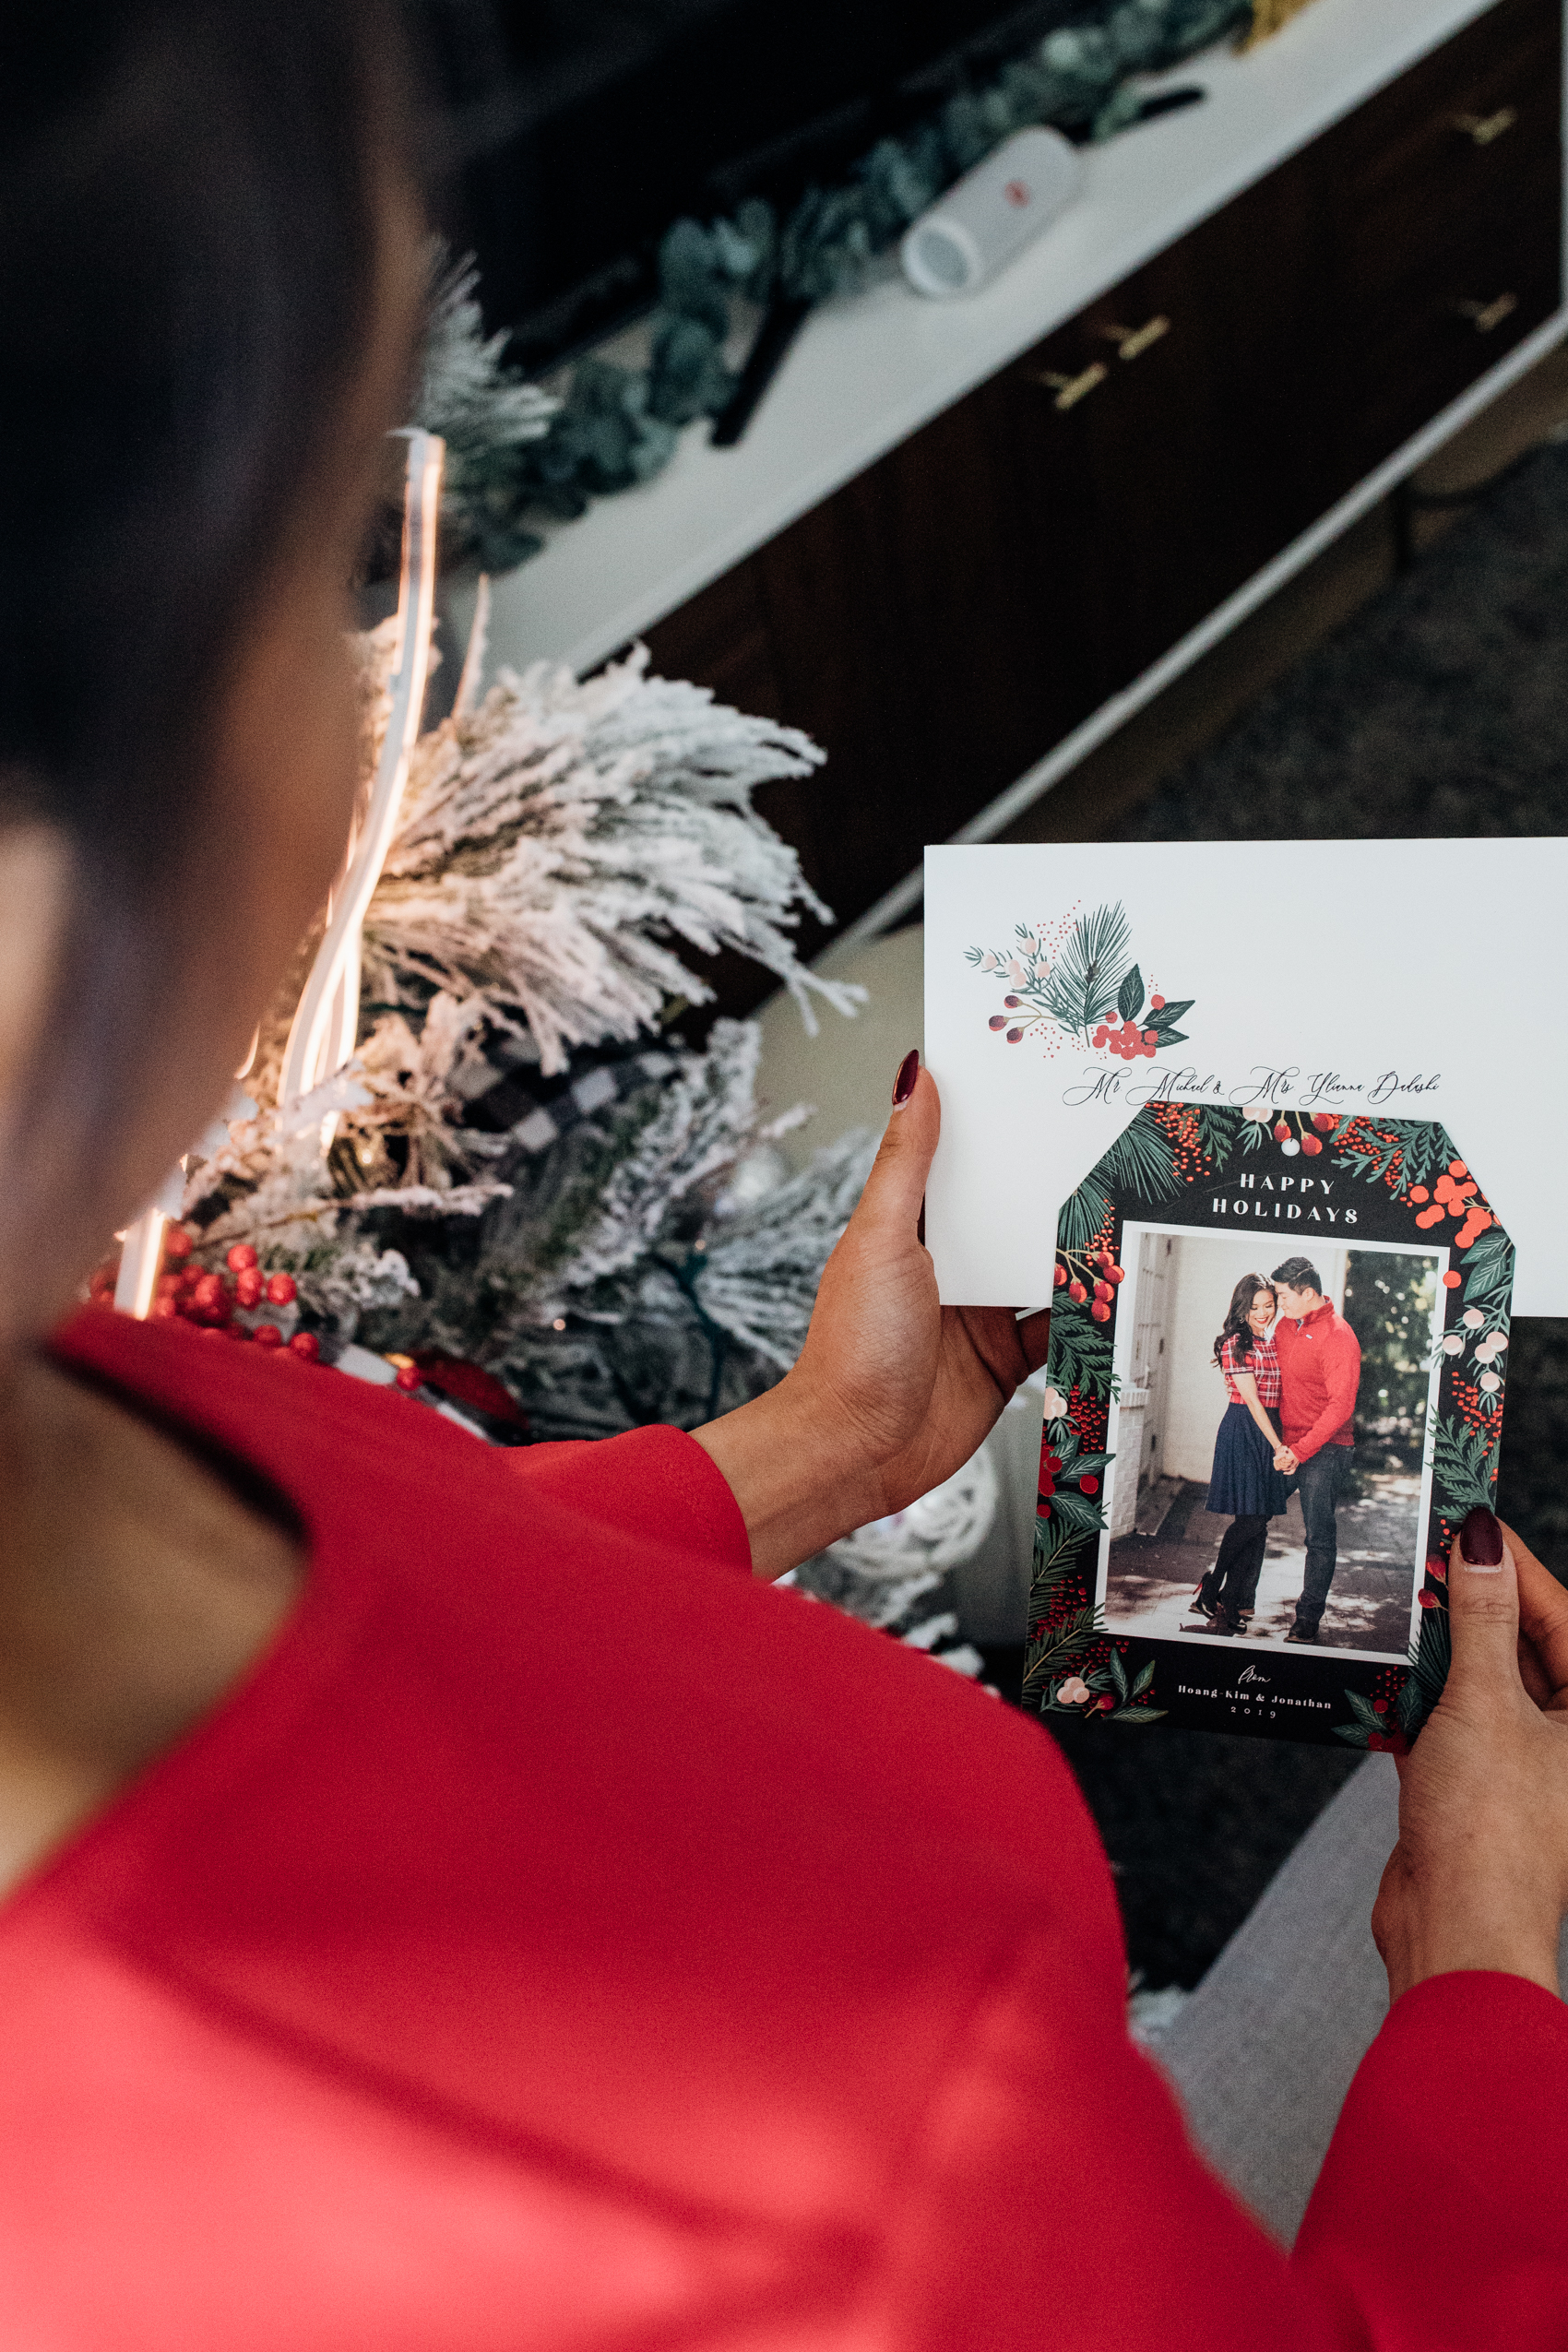 Blogger Hoang-Kim shares her Christmas Cards with minted